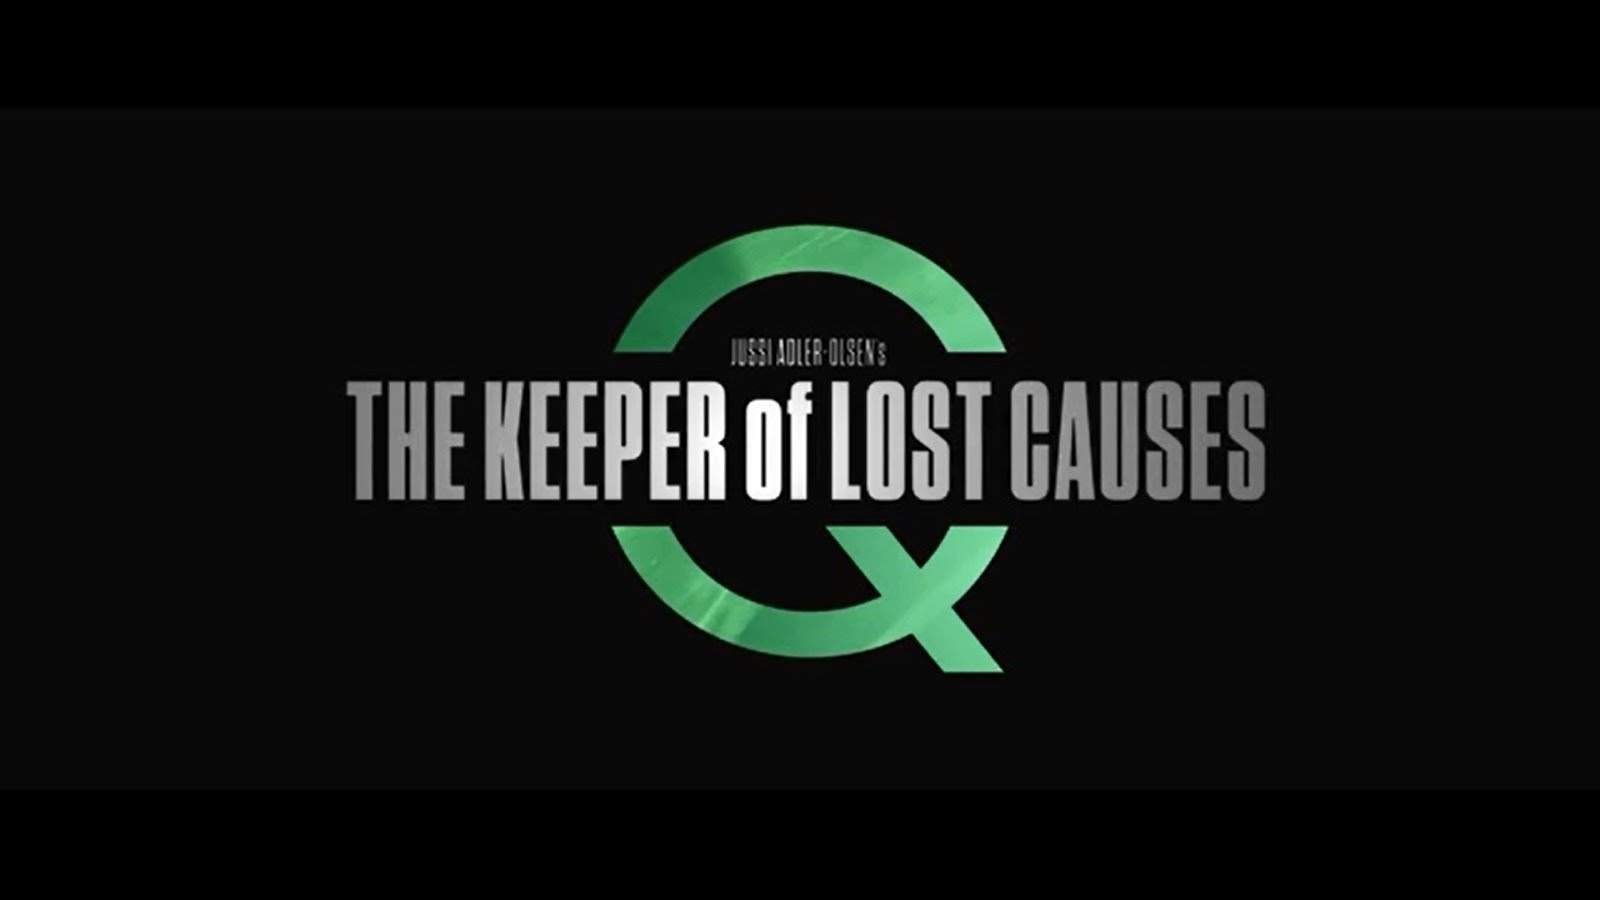 The Keeper of Lost Causes (2013)